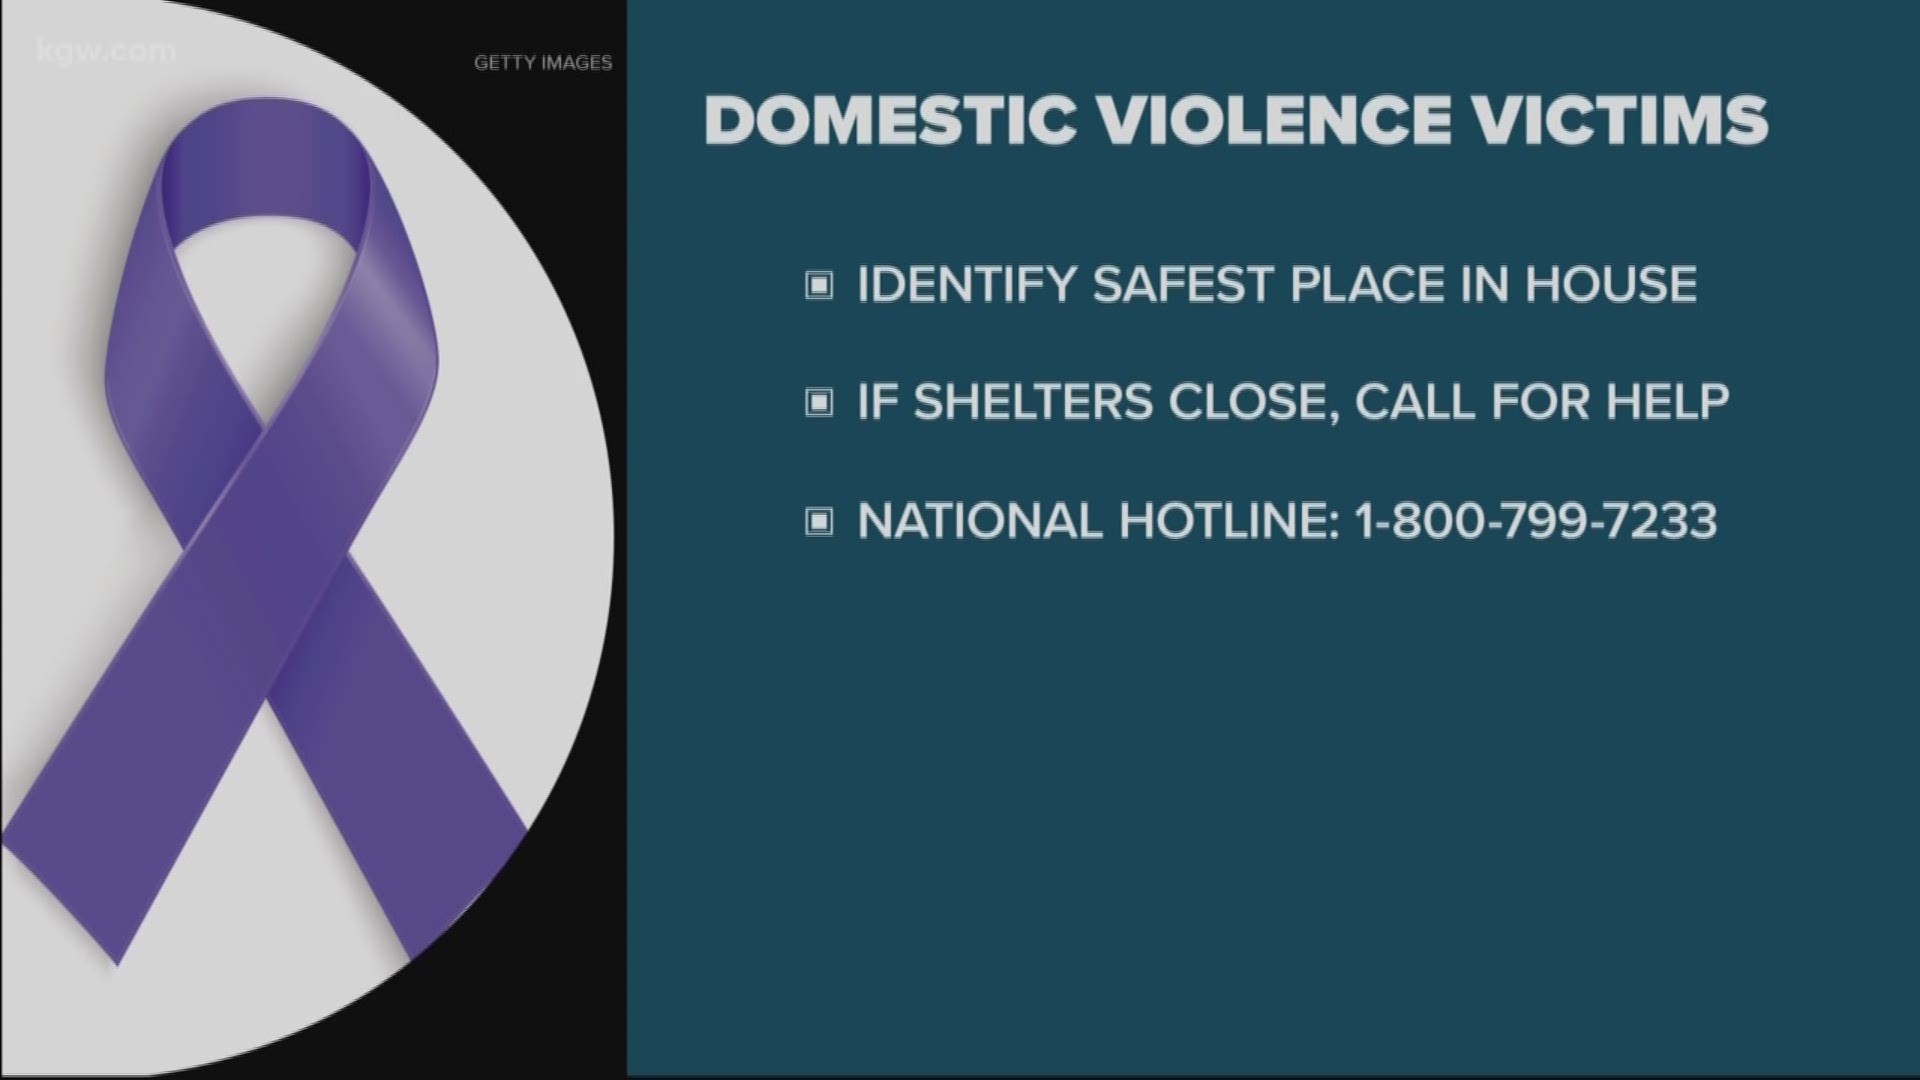 Those experiencing domestic violence or abuse can call the National Domestic Violence Hotline at 1-800-799-7233.